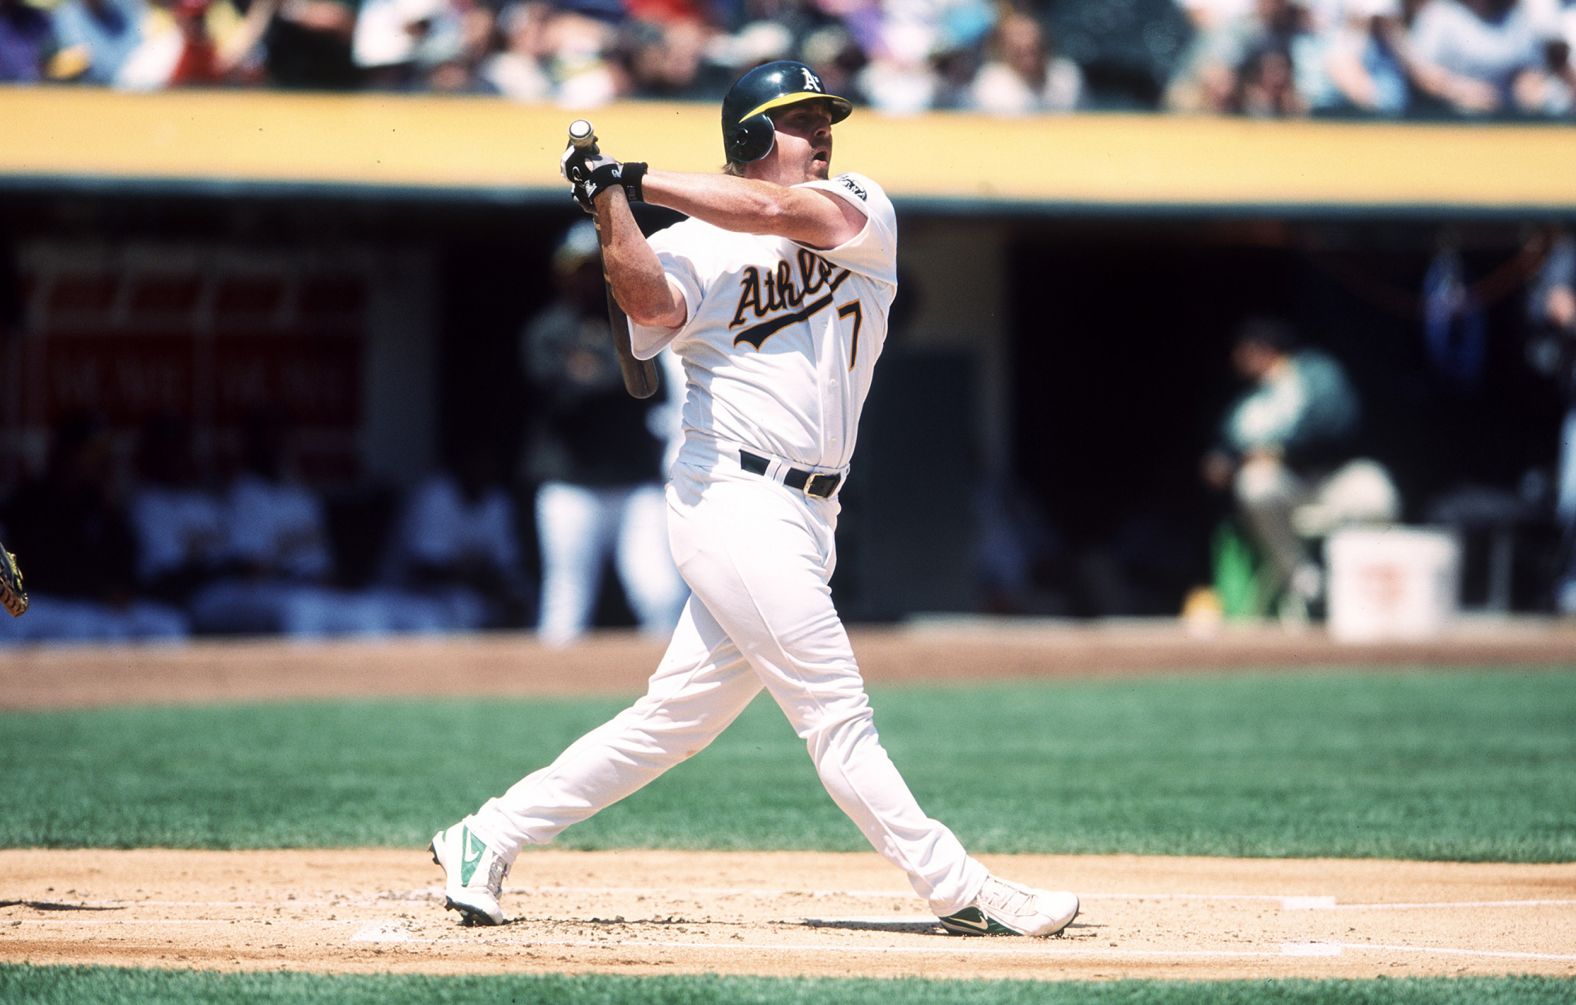 Former Major League Baseball player <a href="index.php?page=&url=https%3A%2F%2Fwww.cnn.com%2F2022%2F02%2F09%2Fsport%2Fjeremy-giambi-death-mlb-spt%2Findex.html" target="_blank">Jeremy Giambi</a> died at the age of 47, a few of his former teams announced on February 9. The cause of death was not released.